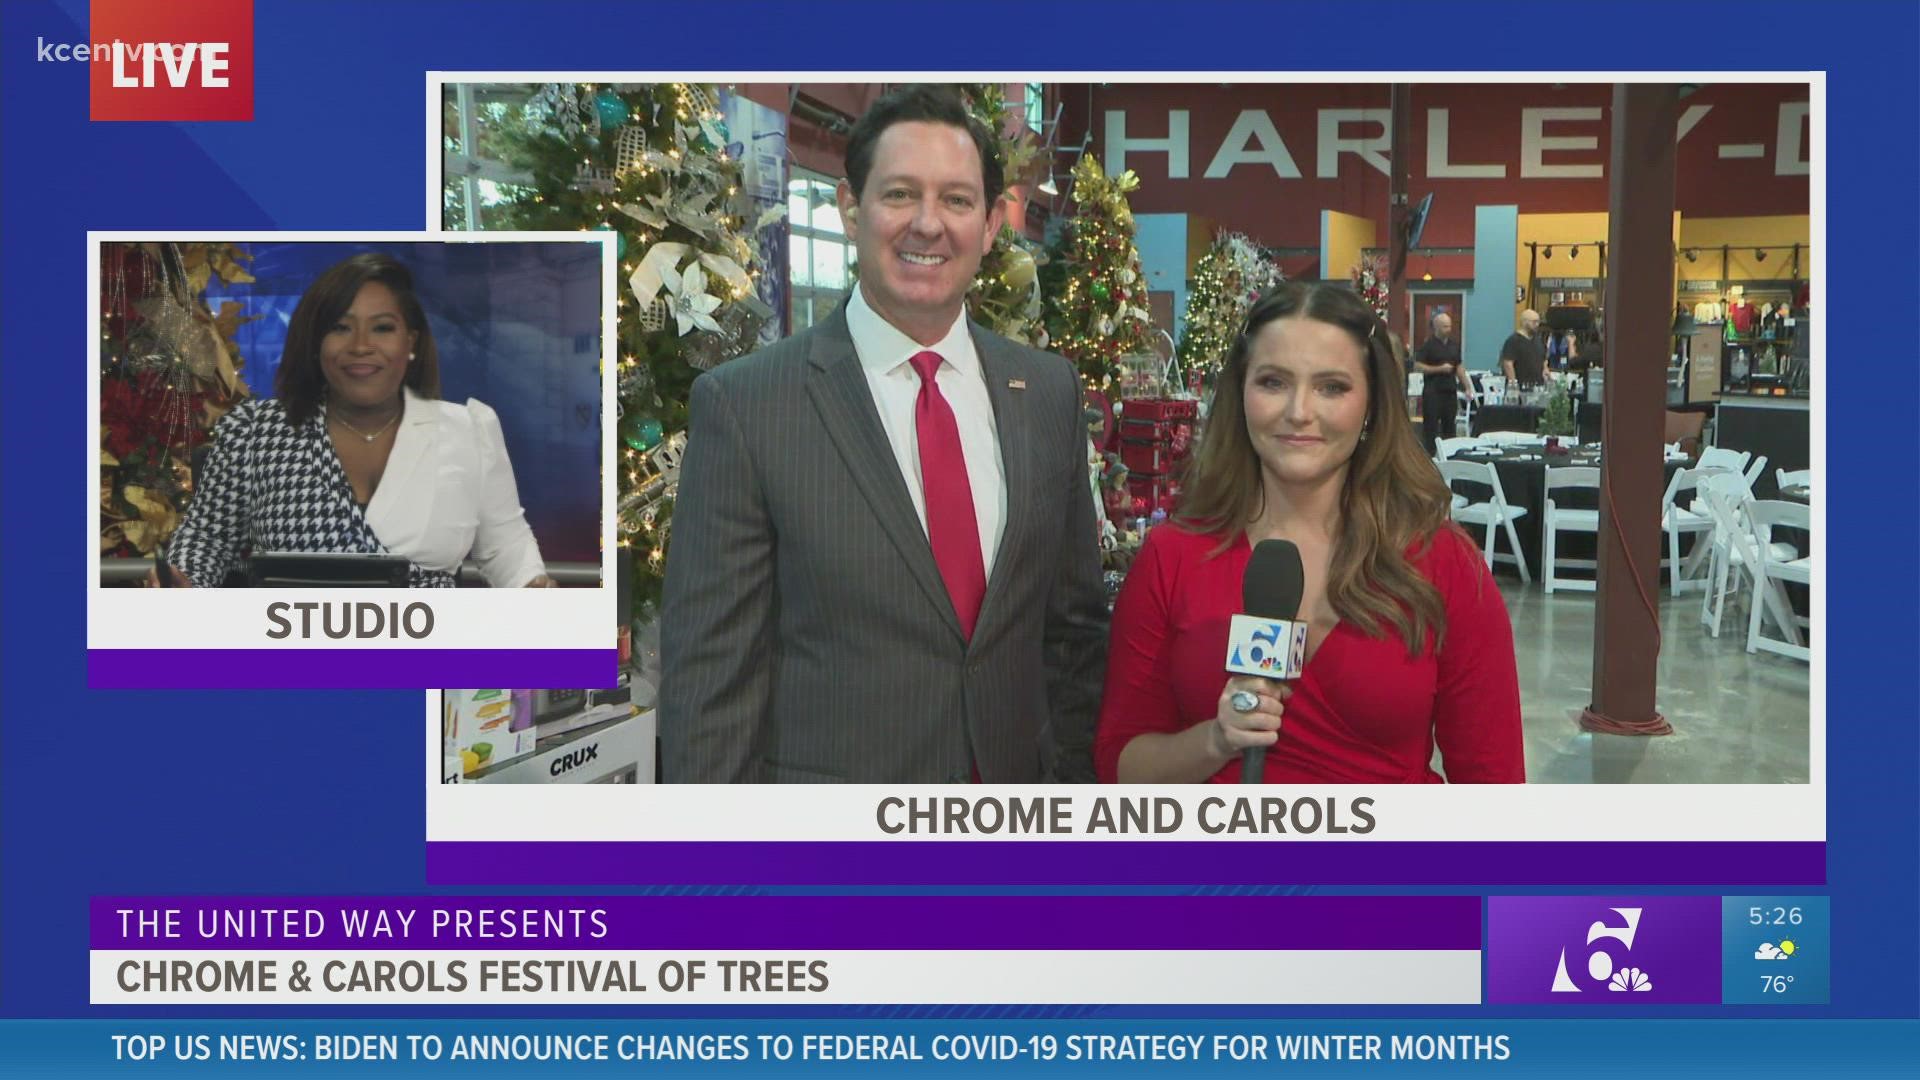 KCEN Leslie Draffin and Kris Radcliffe tell us what to expect at the Chromes and Carols Festival of Trees.